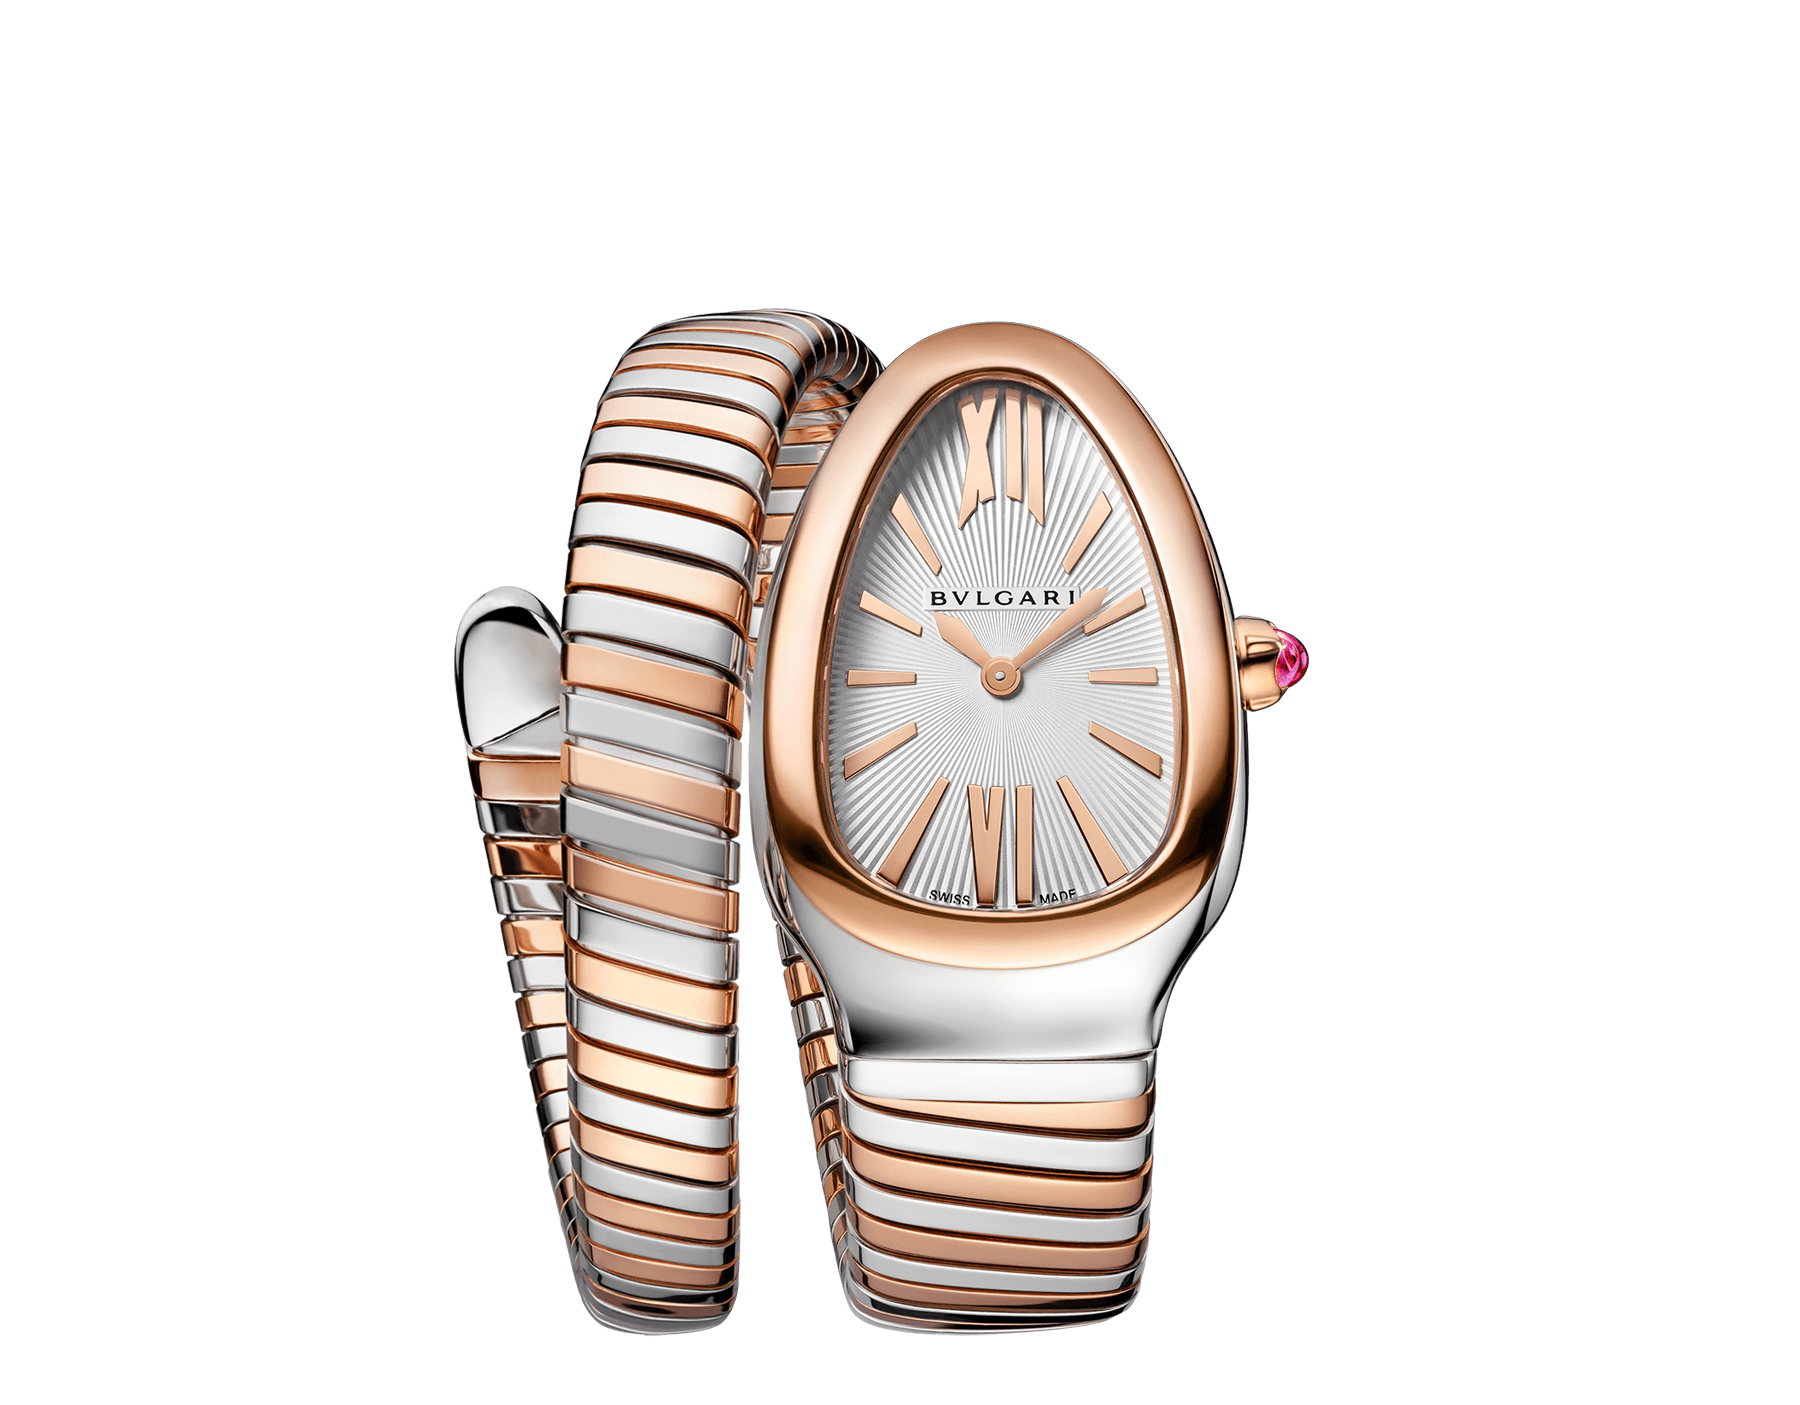 Serpenti Tubogas single-spiral watch in 18 kt rose gold and stainless steel with white opaline dial with guilloché soleil treatment. Water-resistant up to 30 meters. 103708 image 1